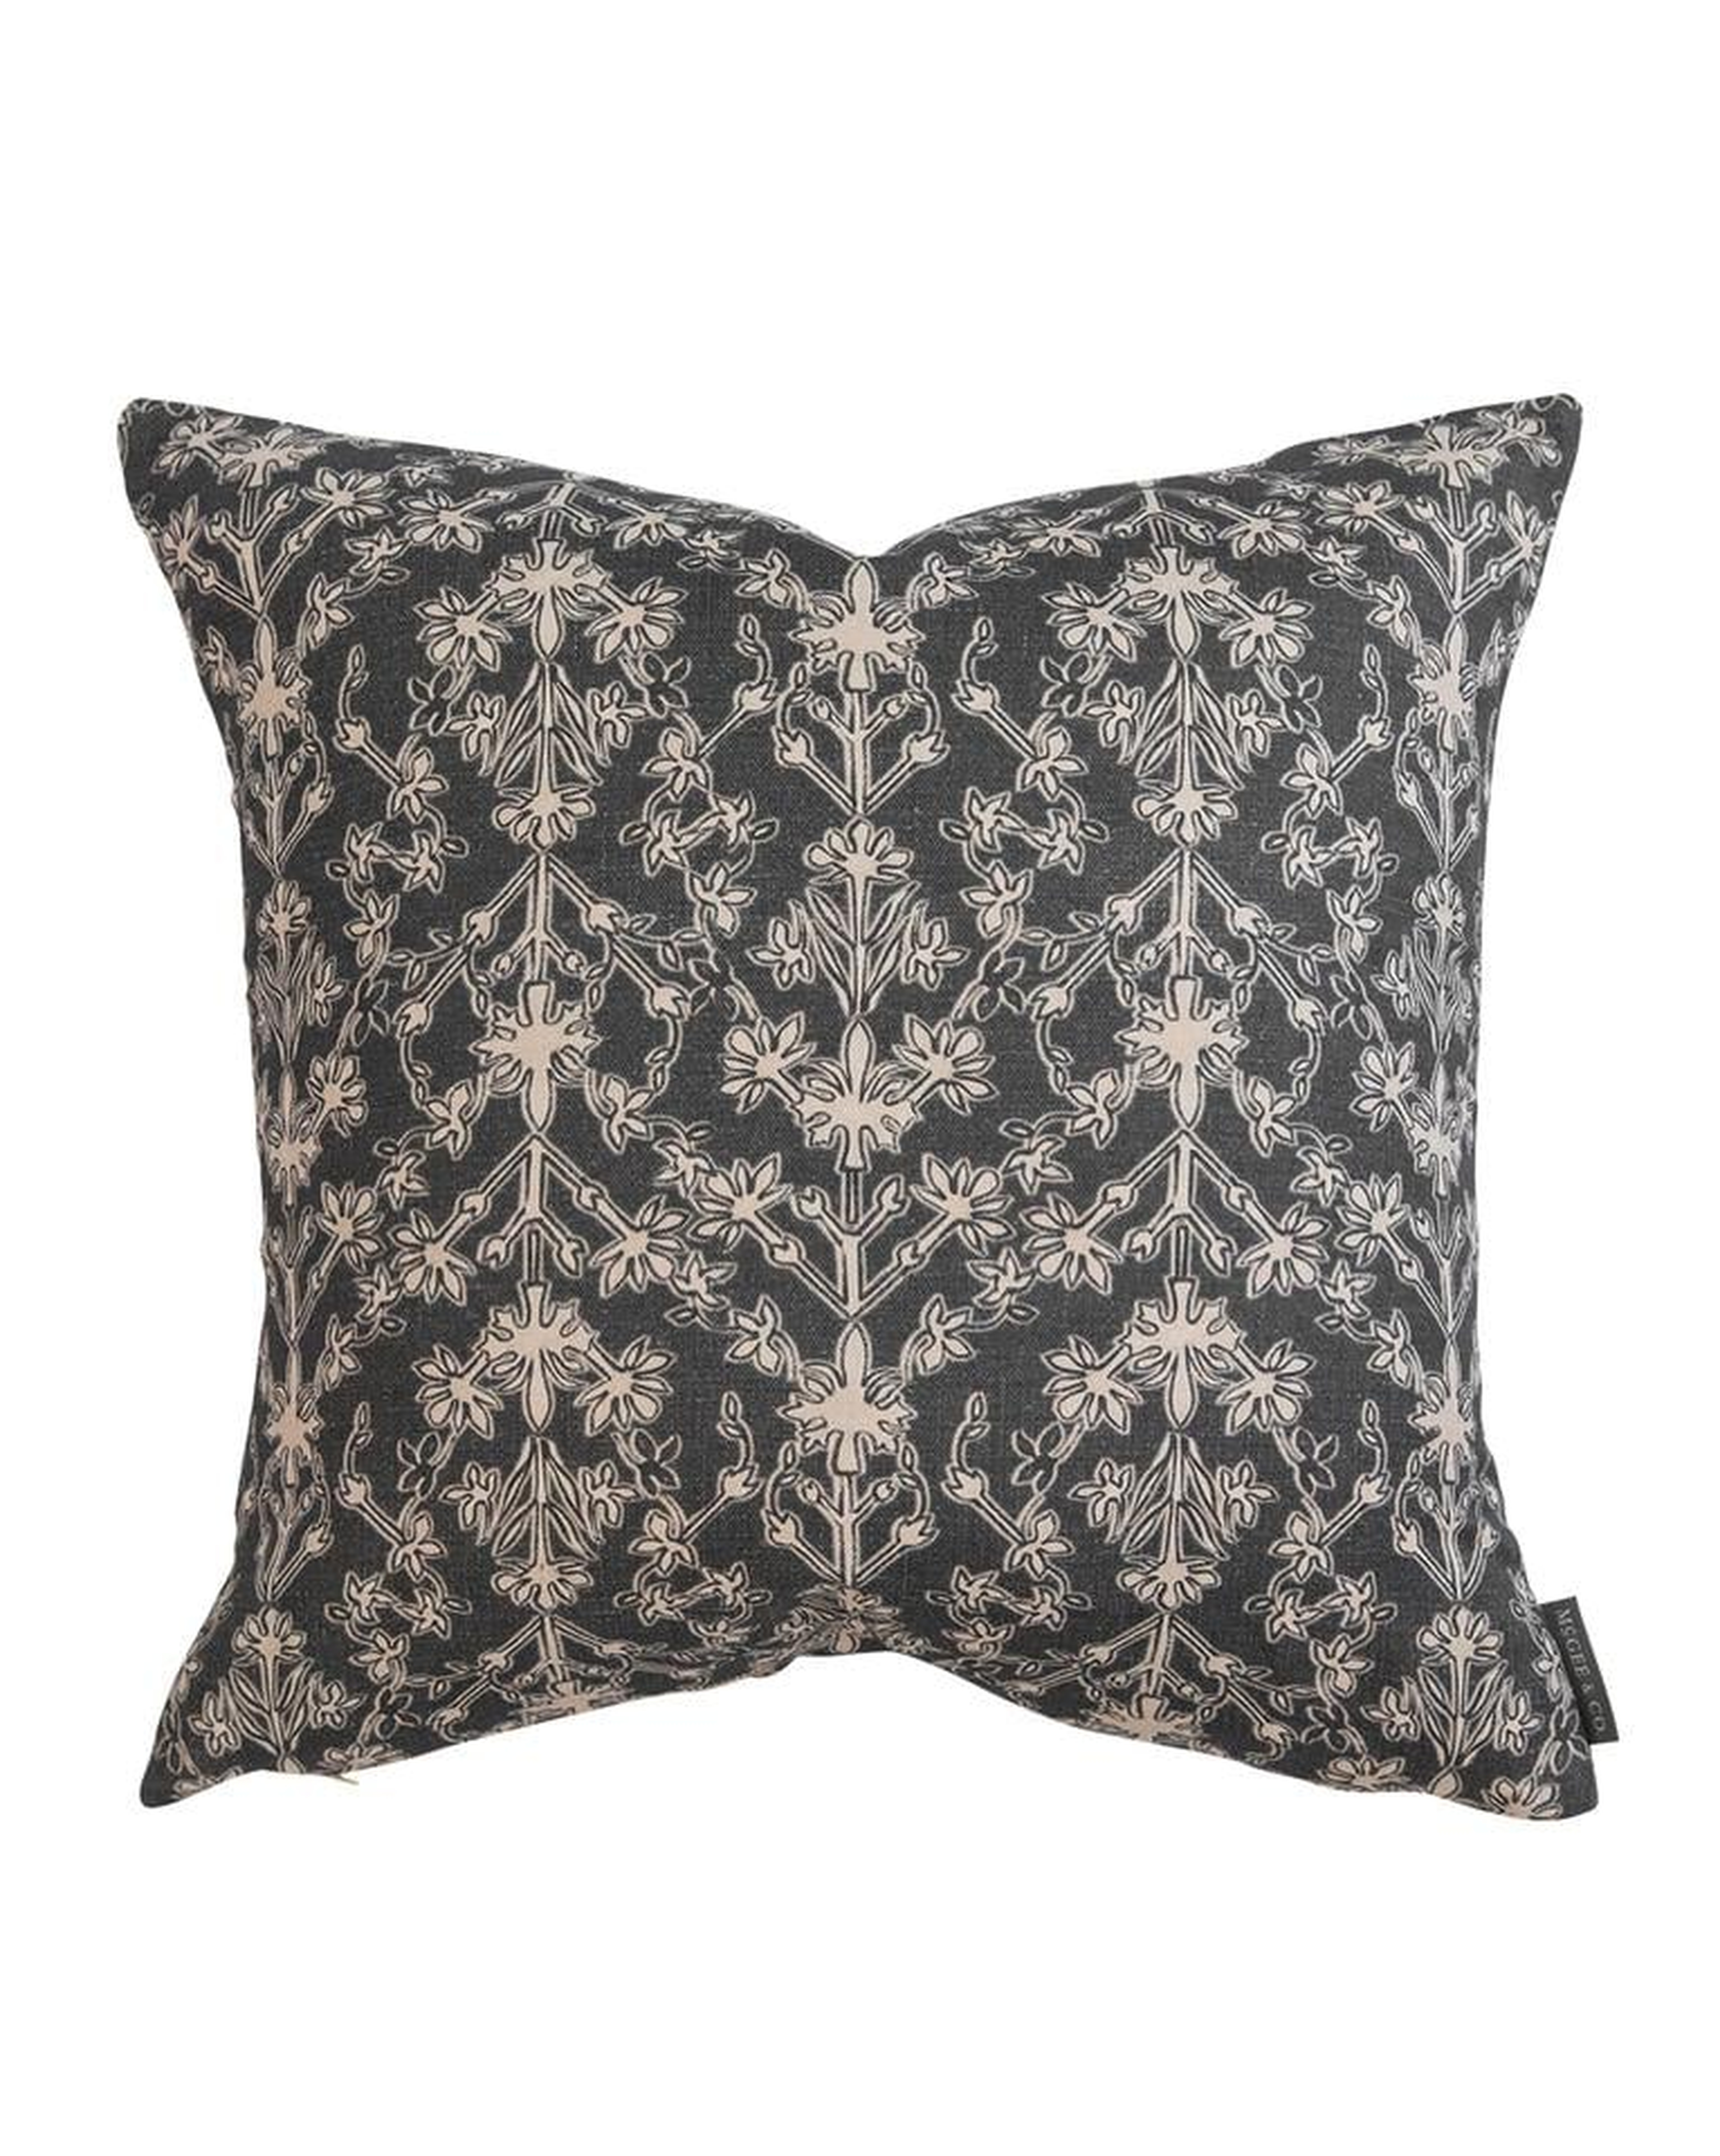 BAYLEE FLORAL PILLOW COVER - McGee & Co.